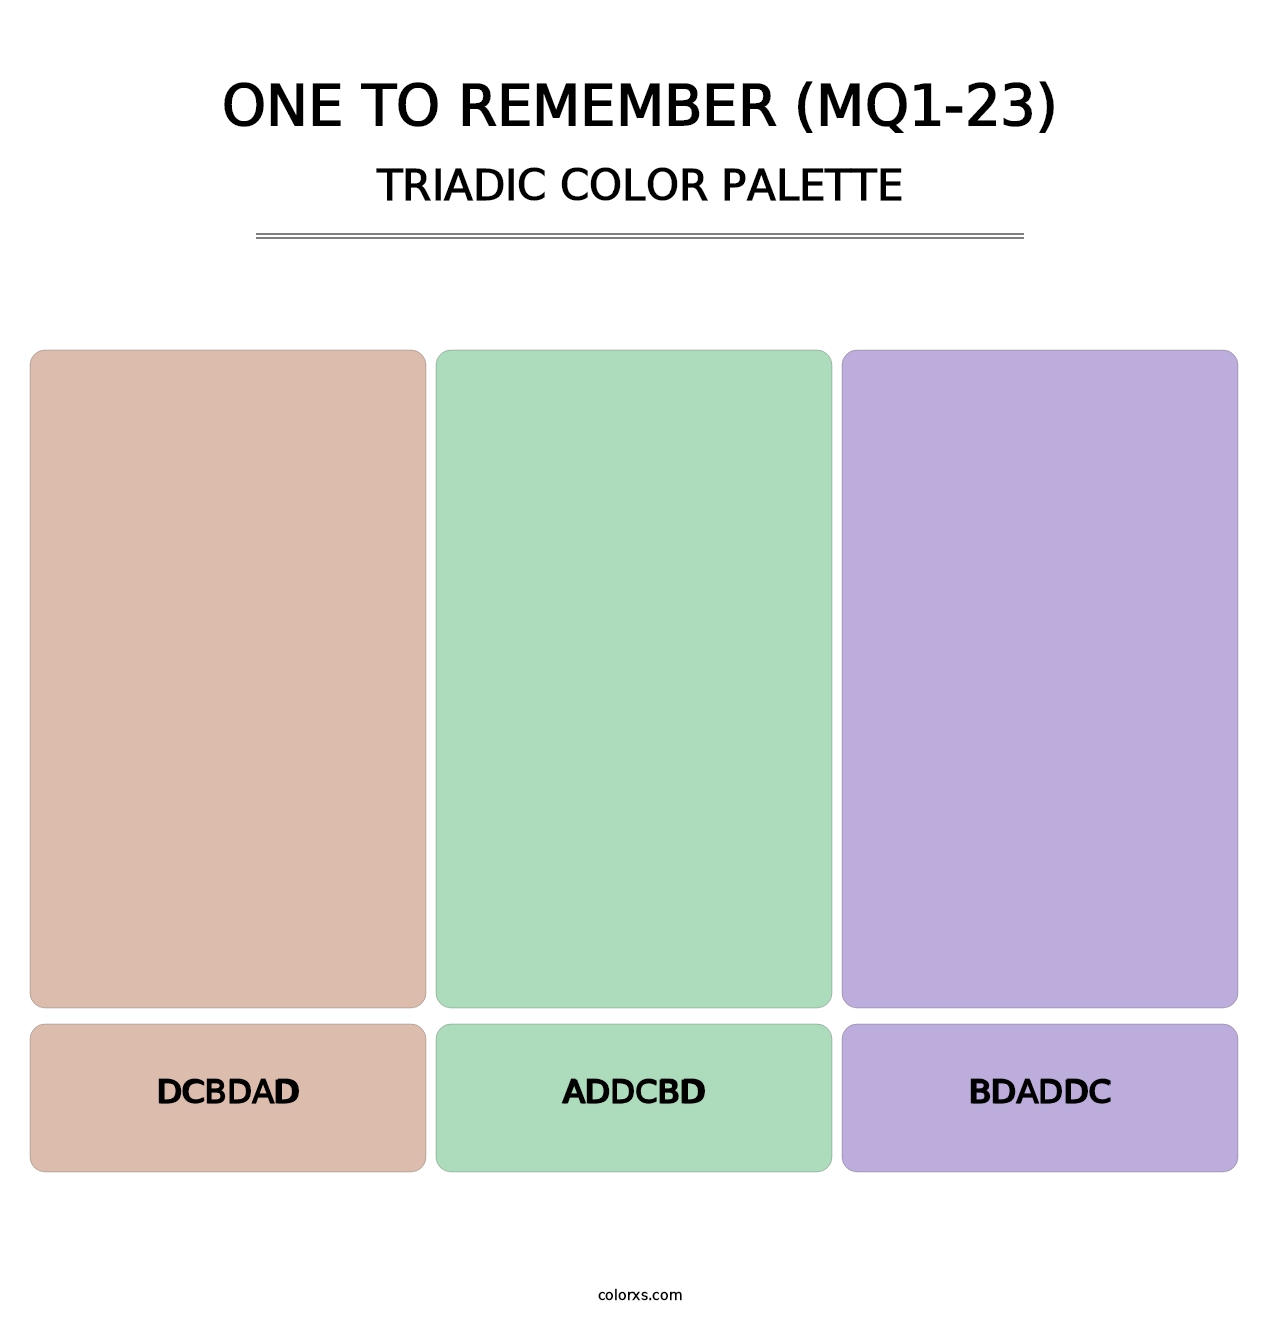 One To Remember (MQ1-23) - Triadic Color Palette